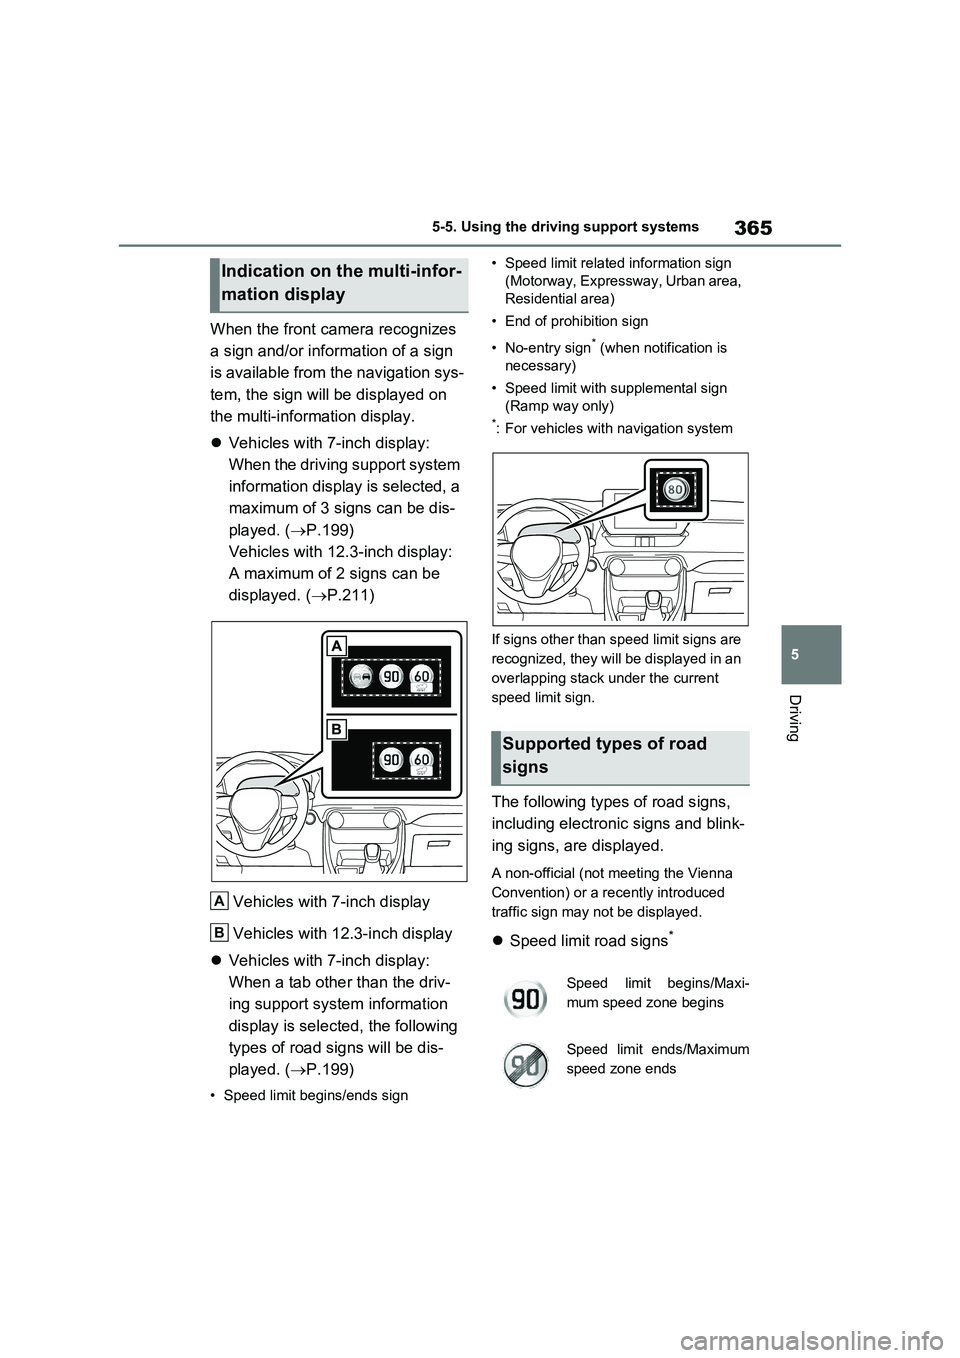 TOYOTA RAV4 PLUG-IN HYBRID 2023  Owners Manual 365
5 5-5. Using the driving support systems
Driving
When the front camera recognizes 
a sign and/or information of a sign 
is available from the navigation sys-
tem, the sign will be displayed on 
th